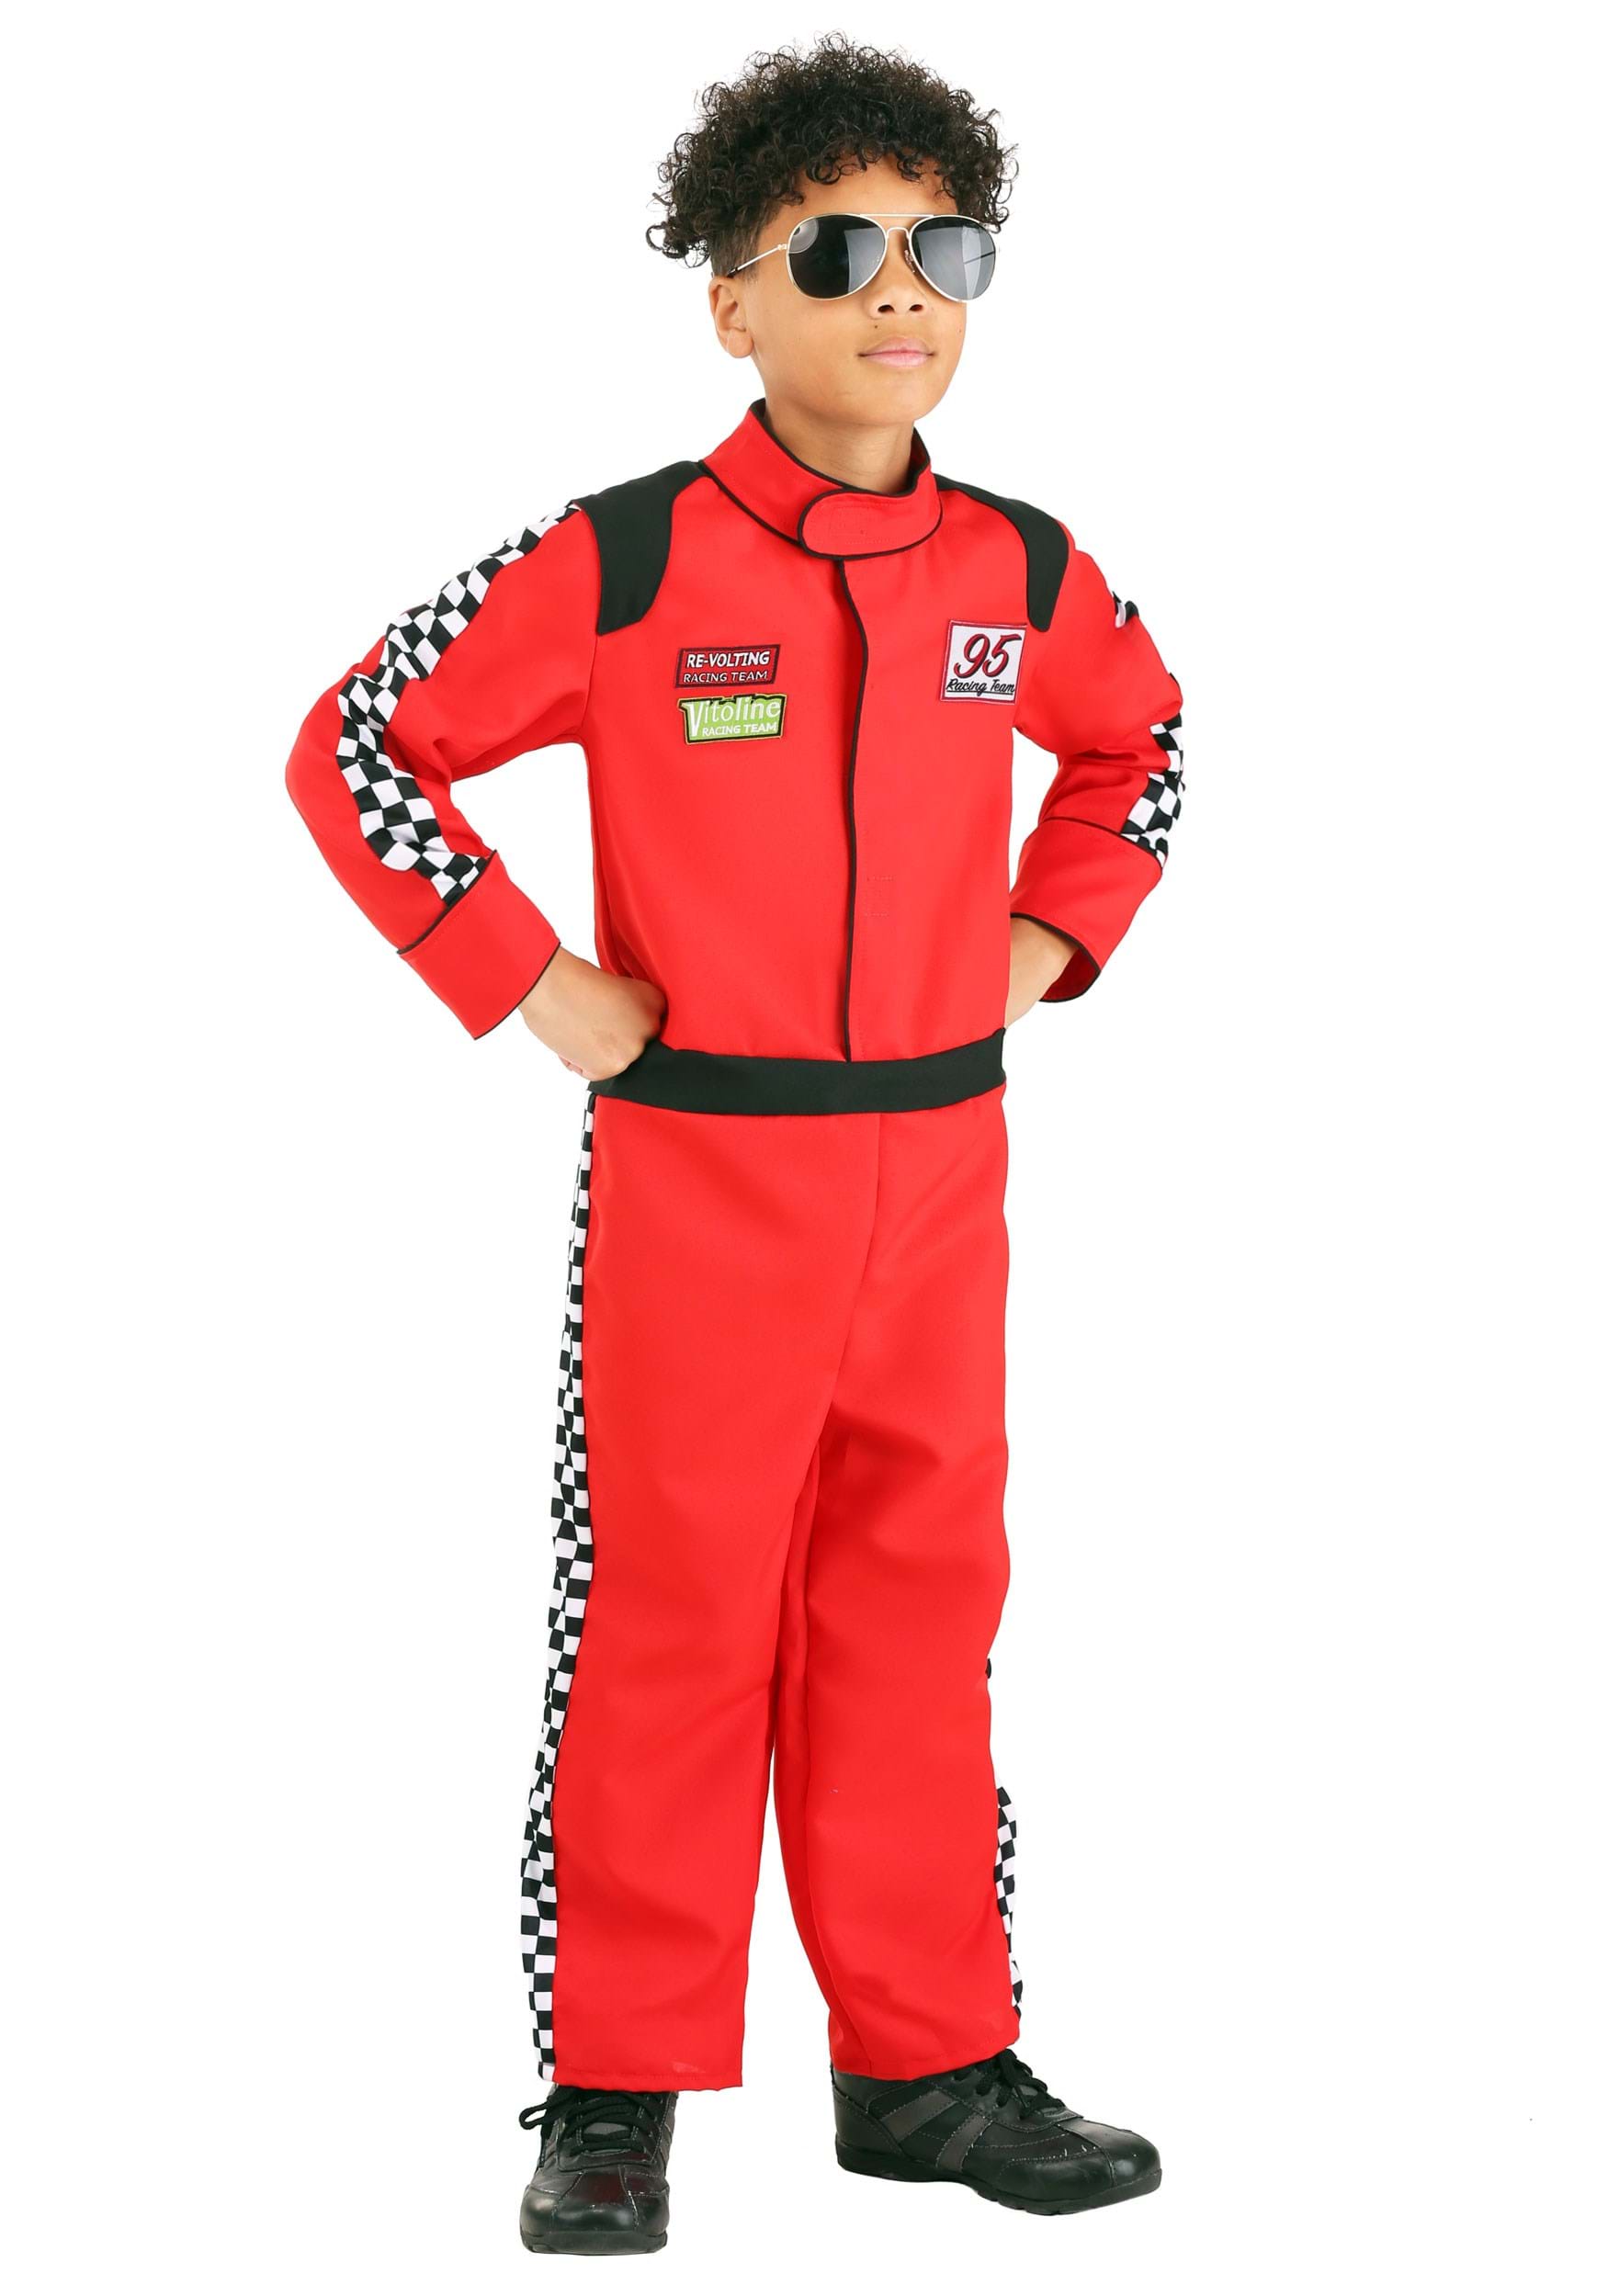 Red Racer Jumpsuit Costume for Kids